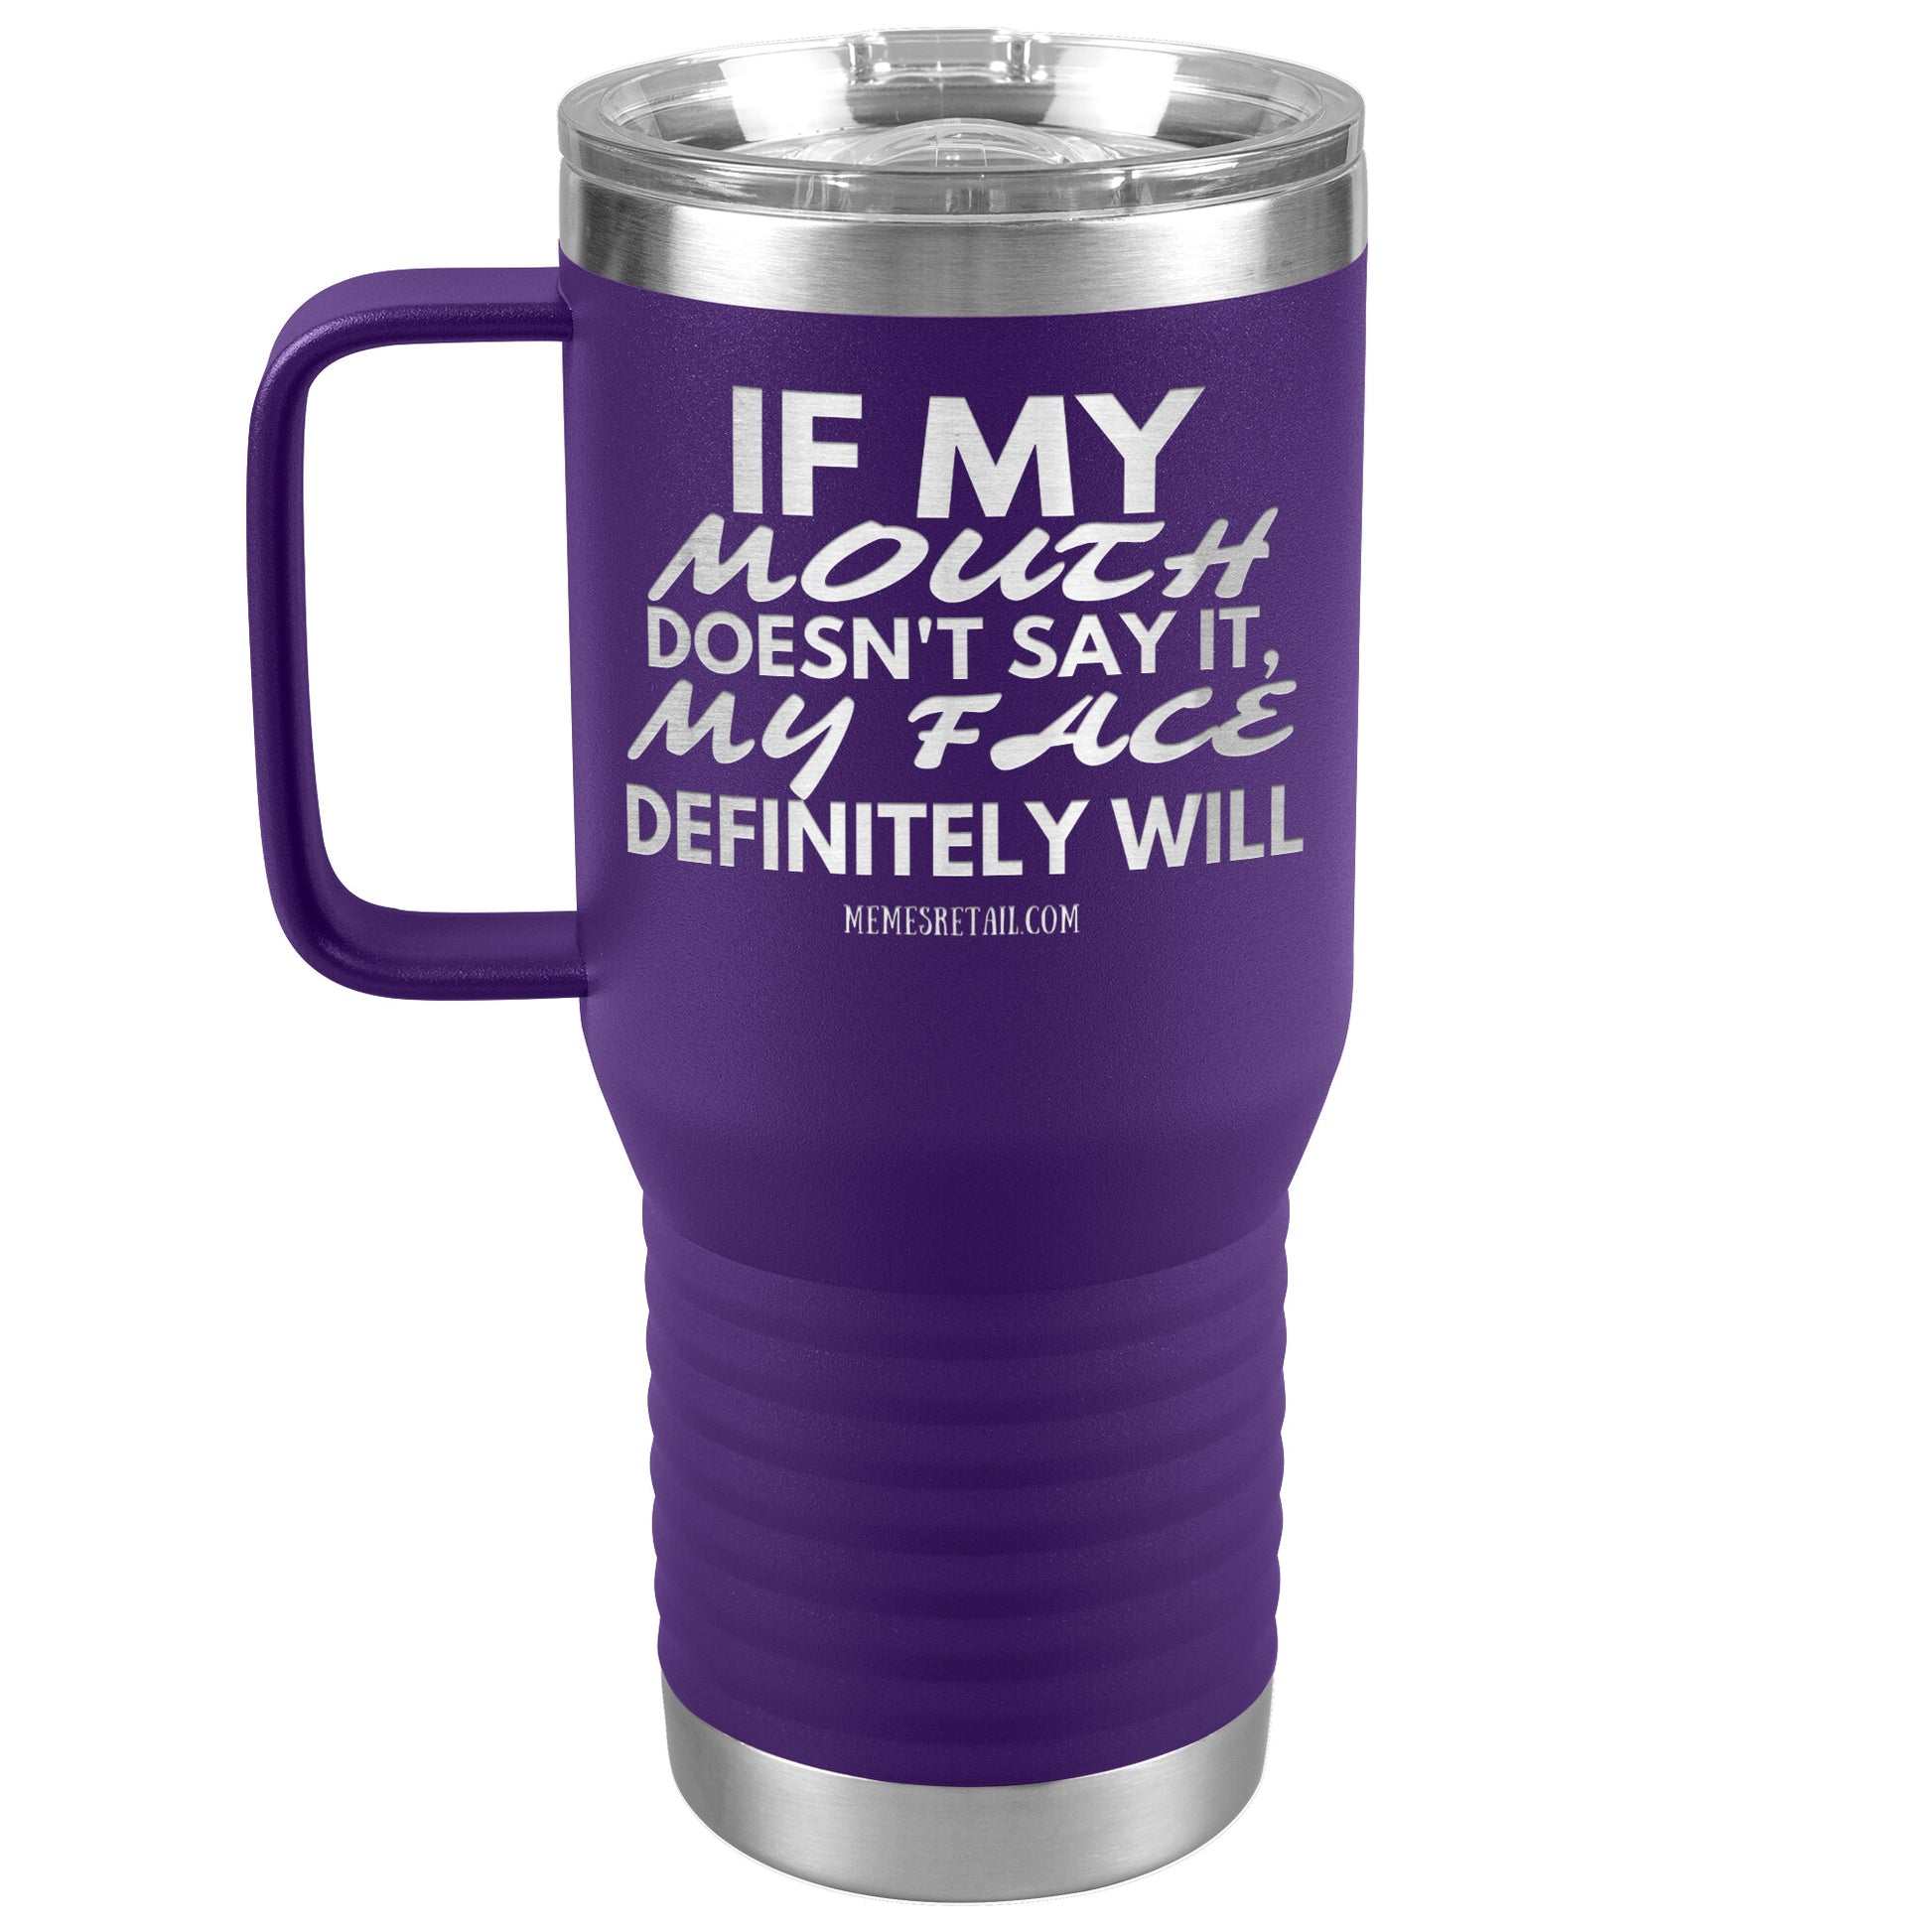 If my mouth doesn't say it, my face definitely will Tumblers, 20oz Travel Tumbler / Purple - MemesRetail.com